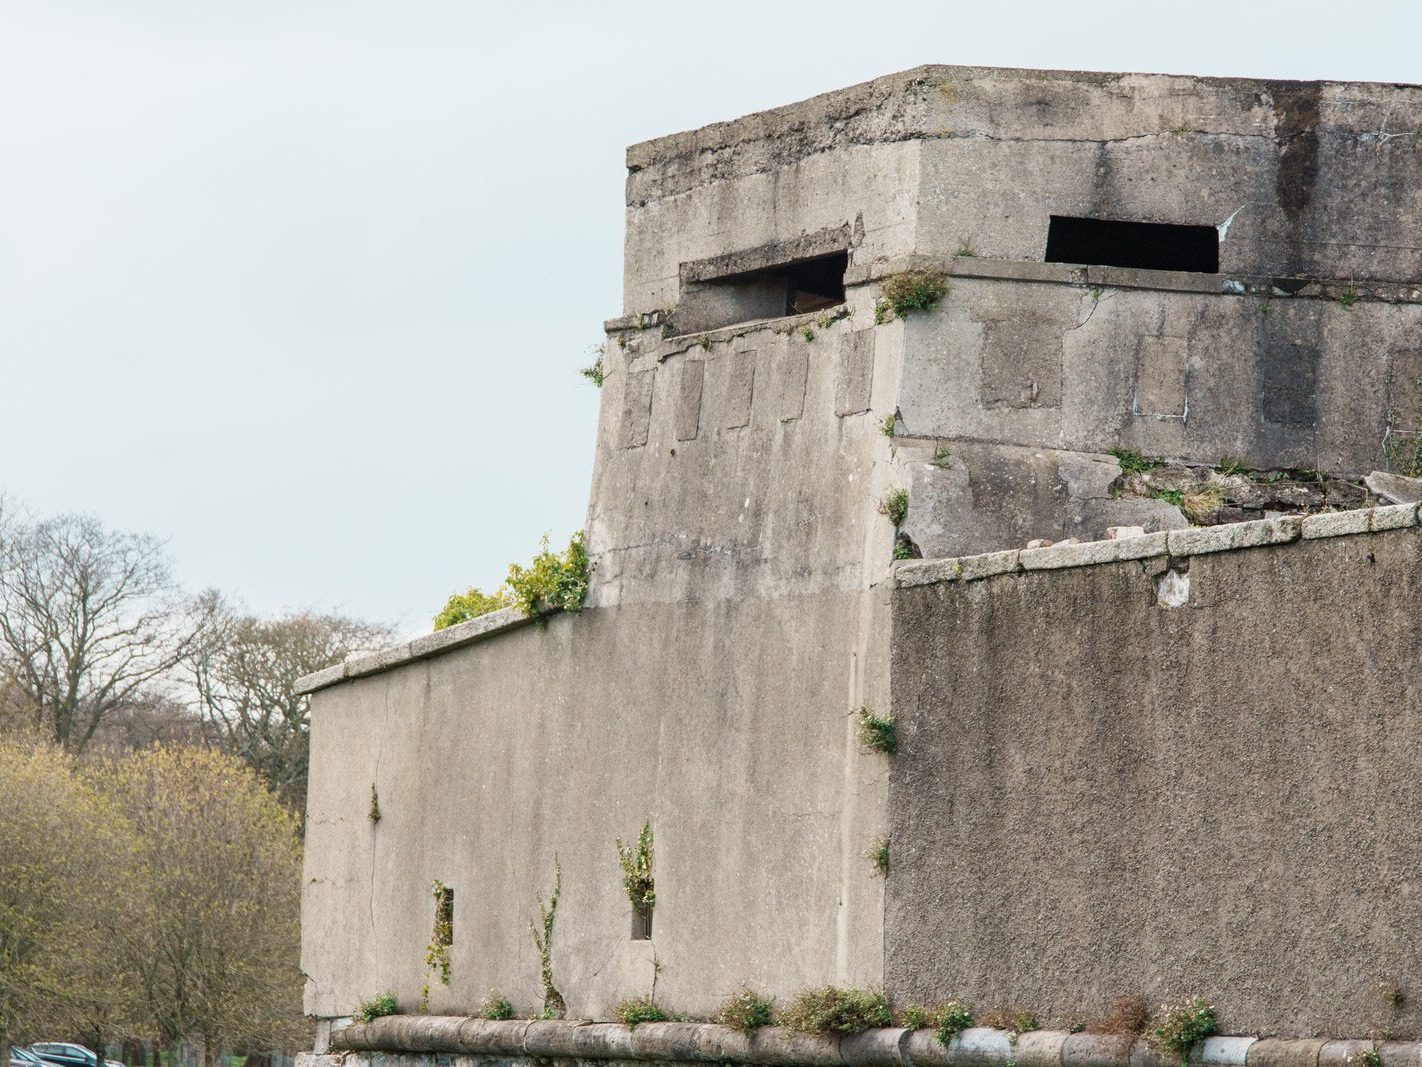 THE MAGAZINE FORT IN PHOENIX PARK [THERE IS MUCH INFORMATION AND A COMPLICATED STORY]-223506-1